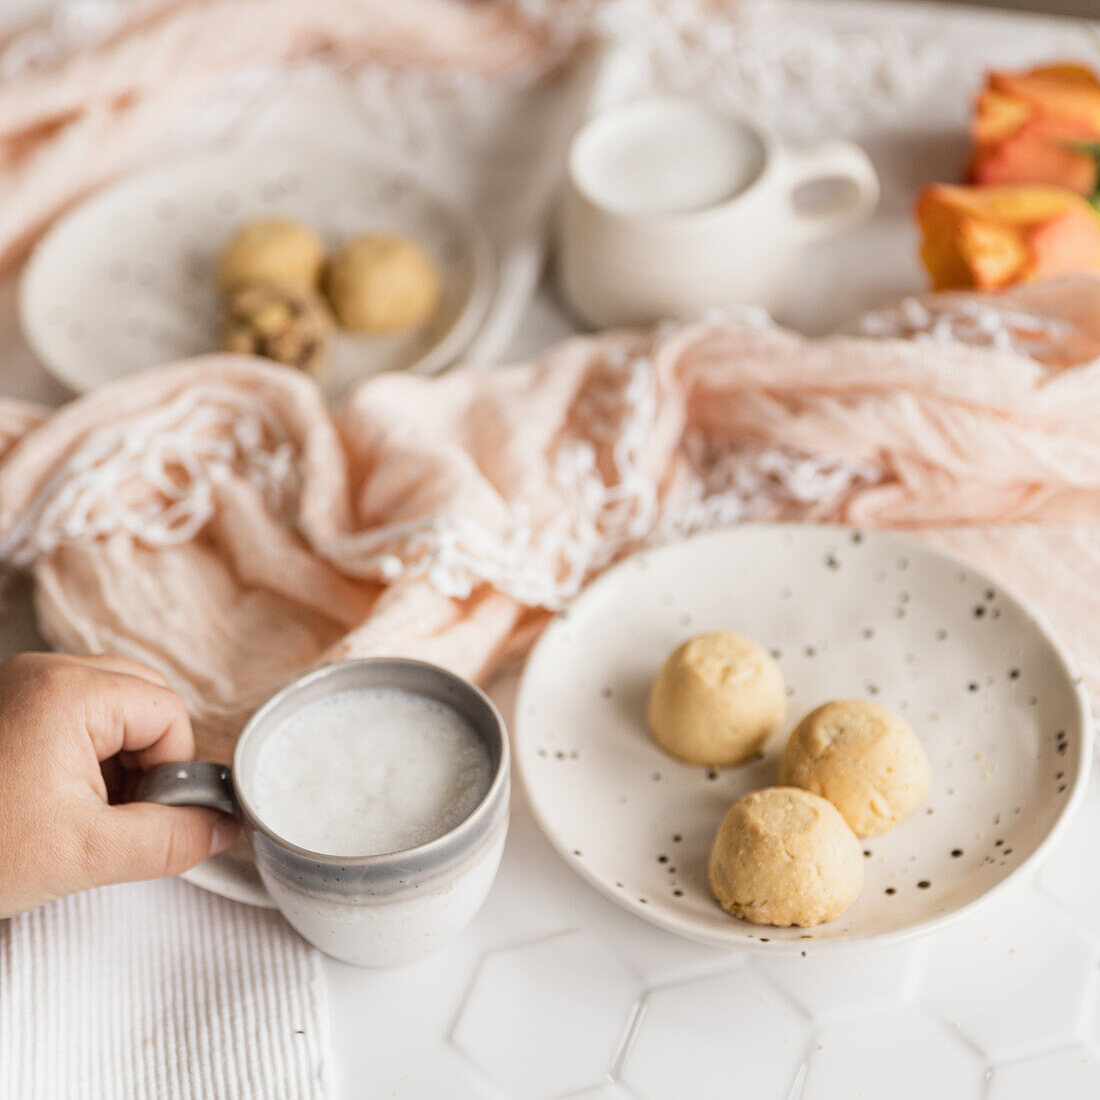 Childs hand holding a babychino in a stoneware espresso mug, with shortbreak cookies on white stoneware plates